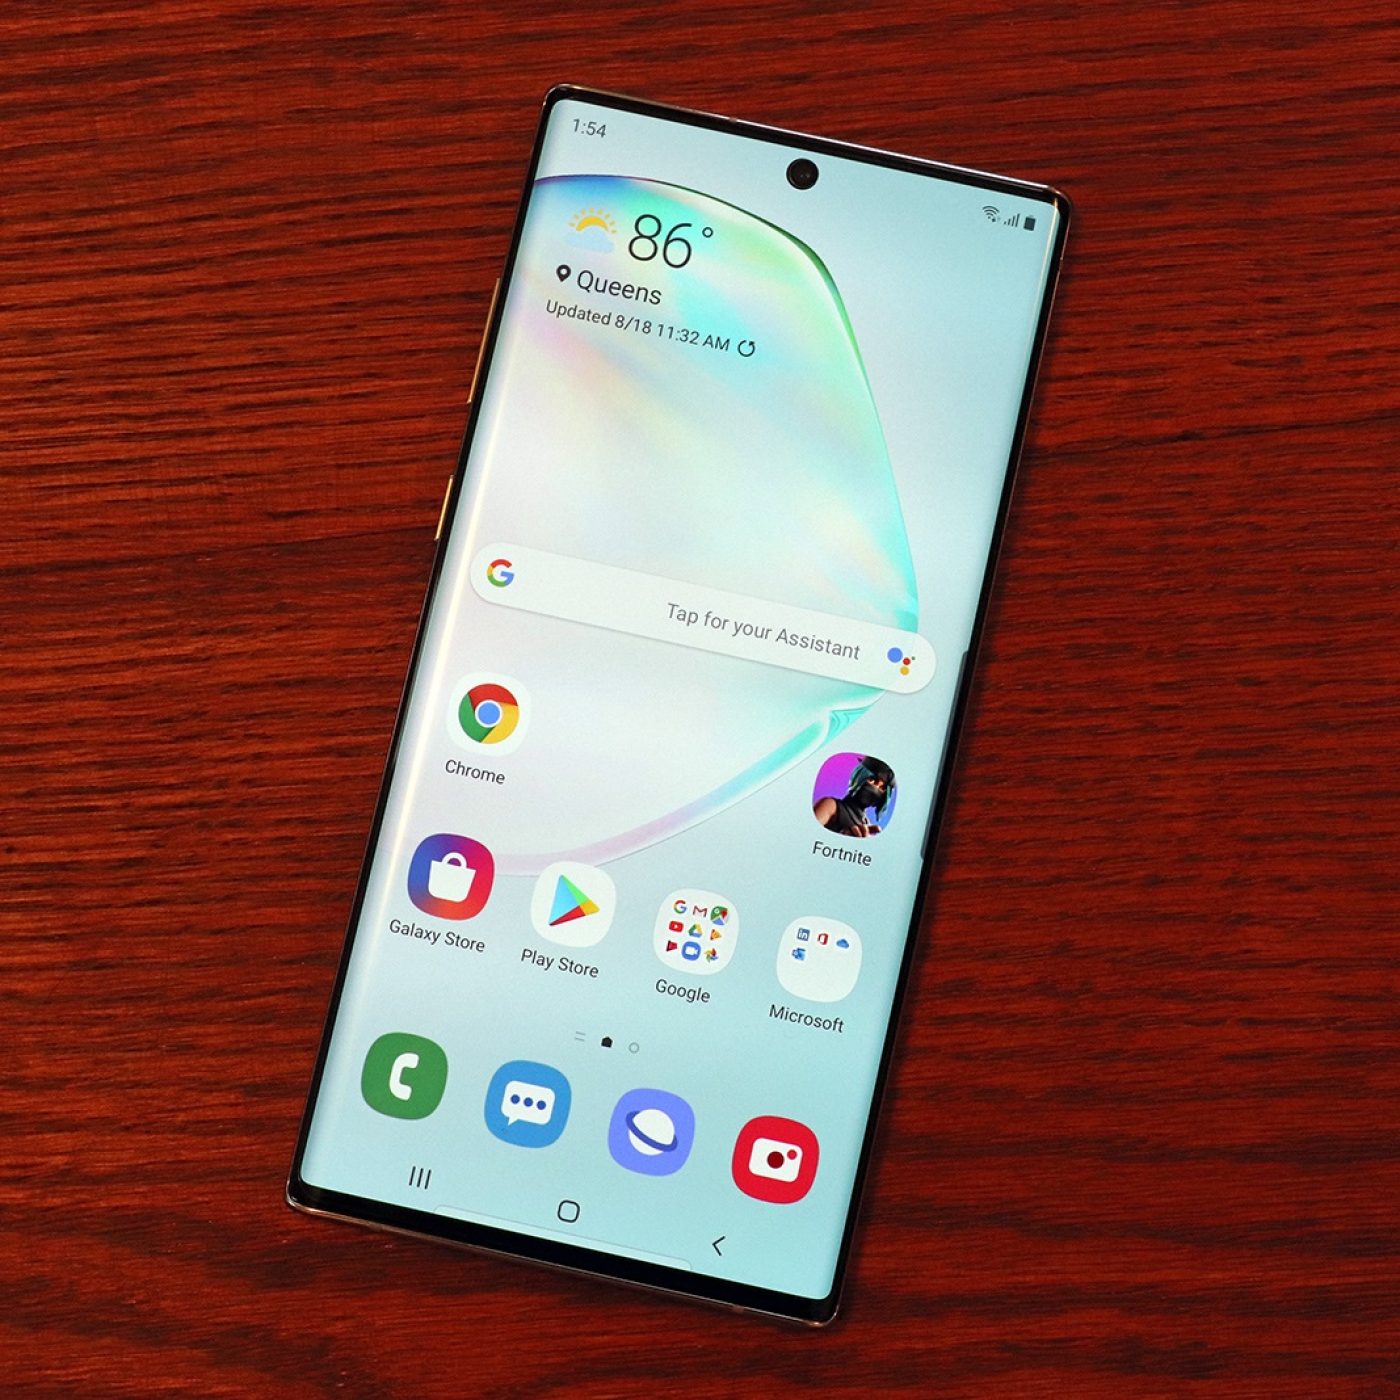 New Samsung Galaxy Note 10 5G renders point to a stunning flagship